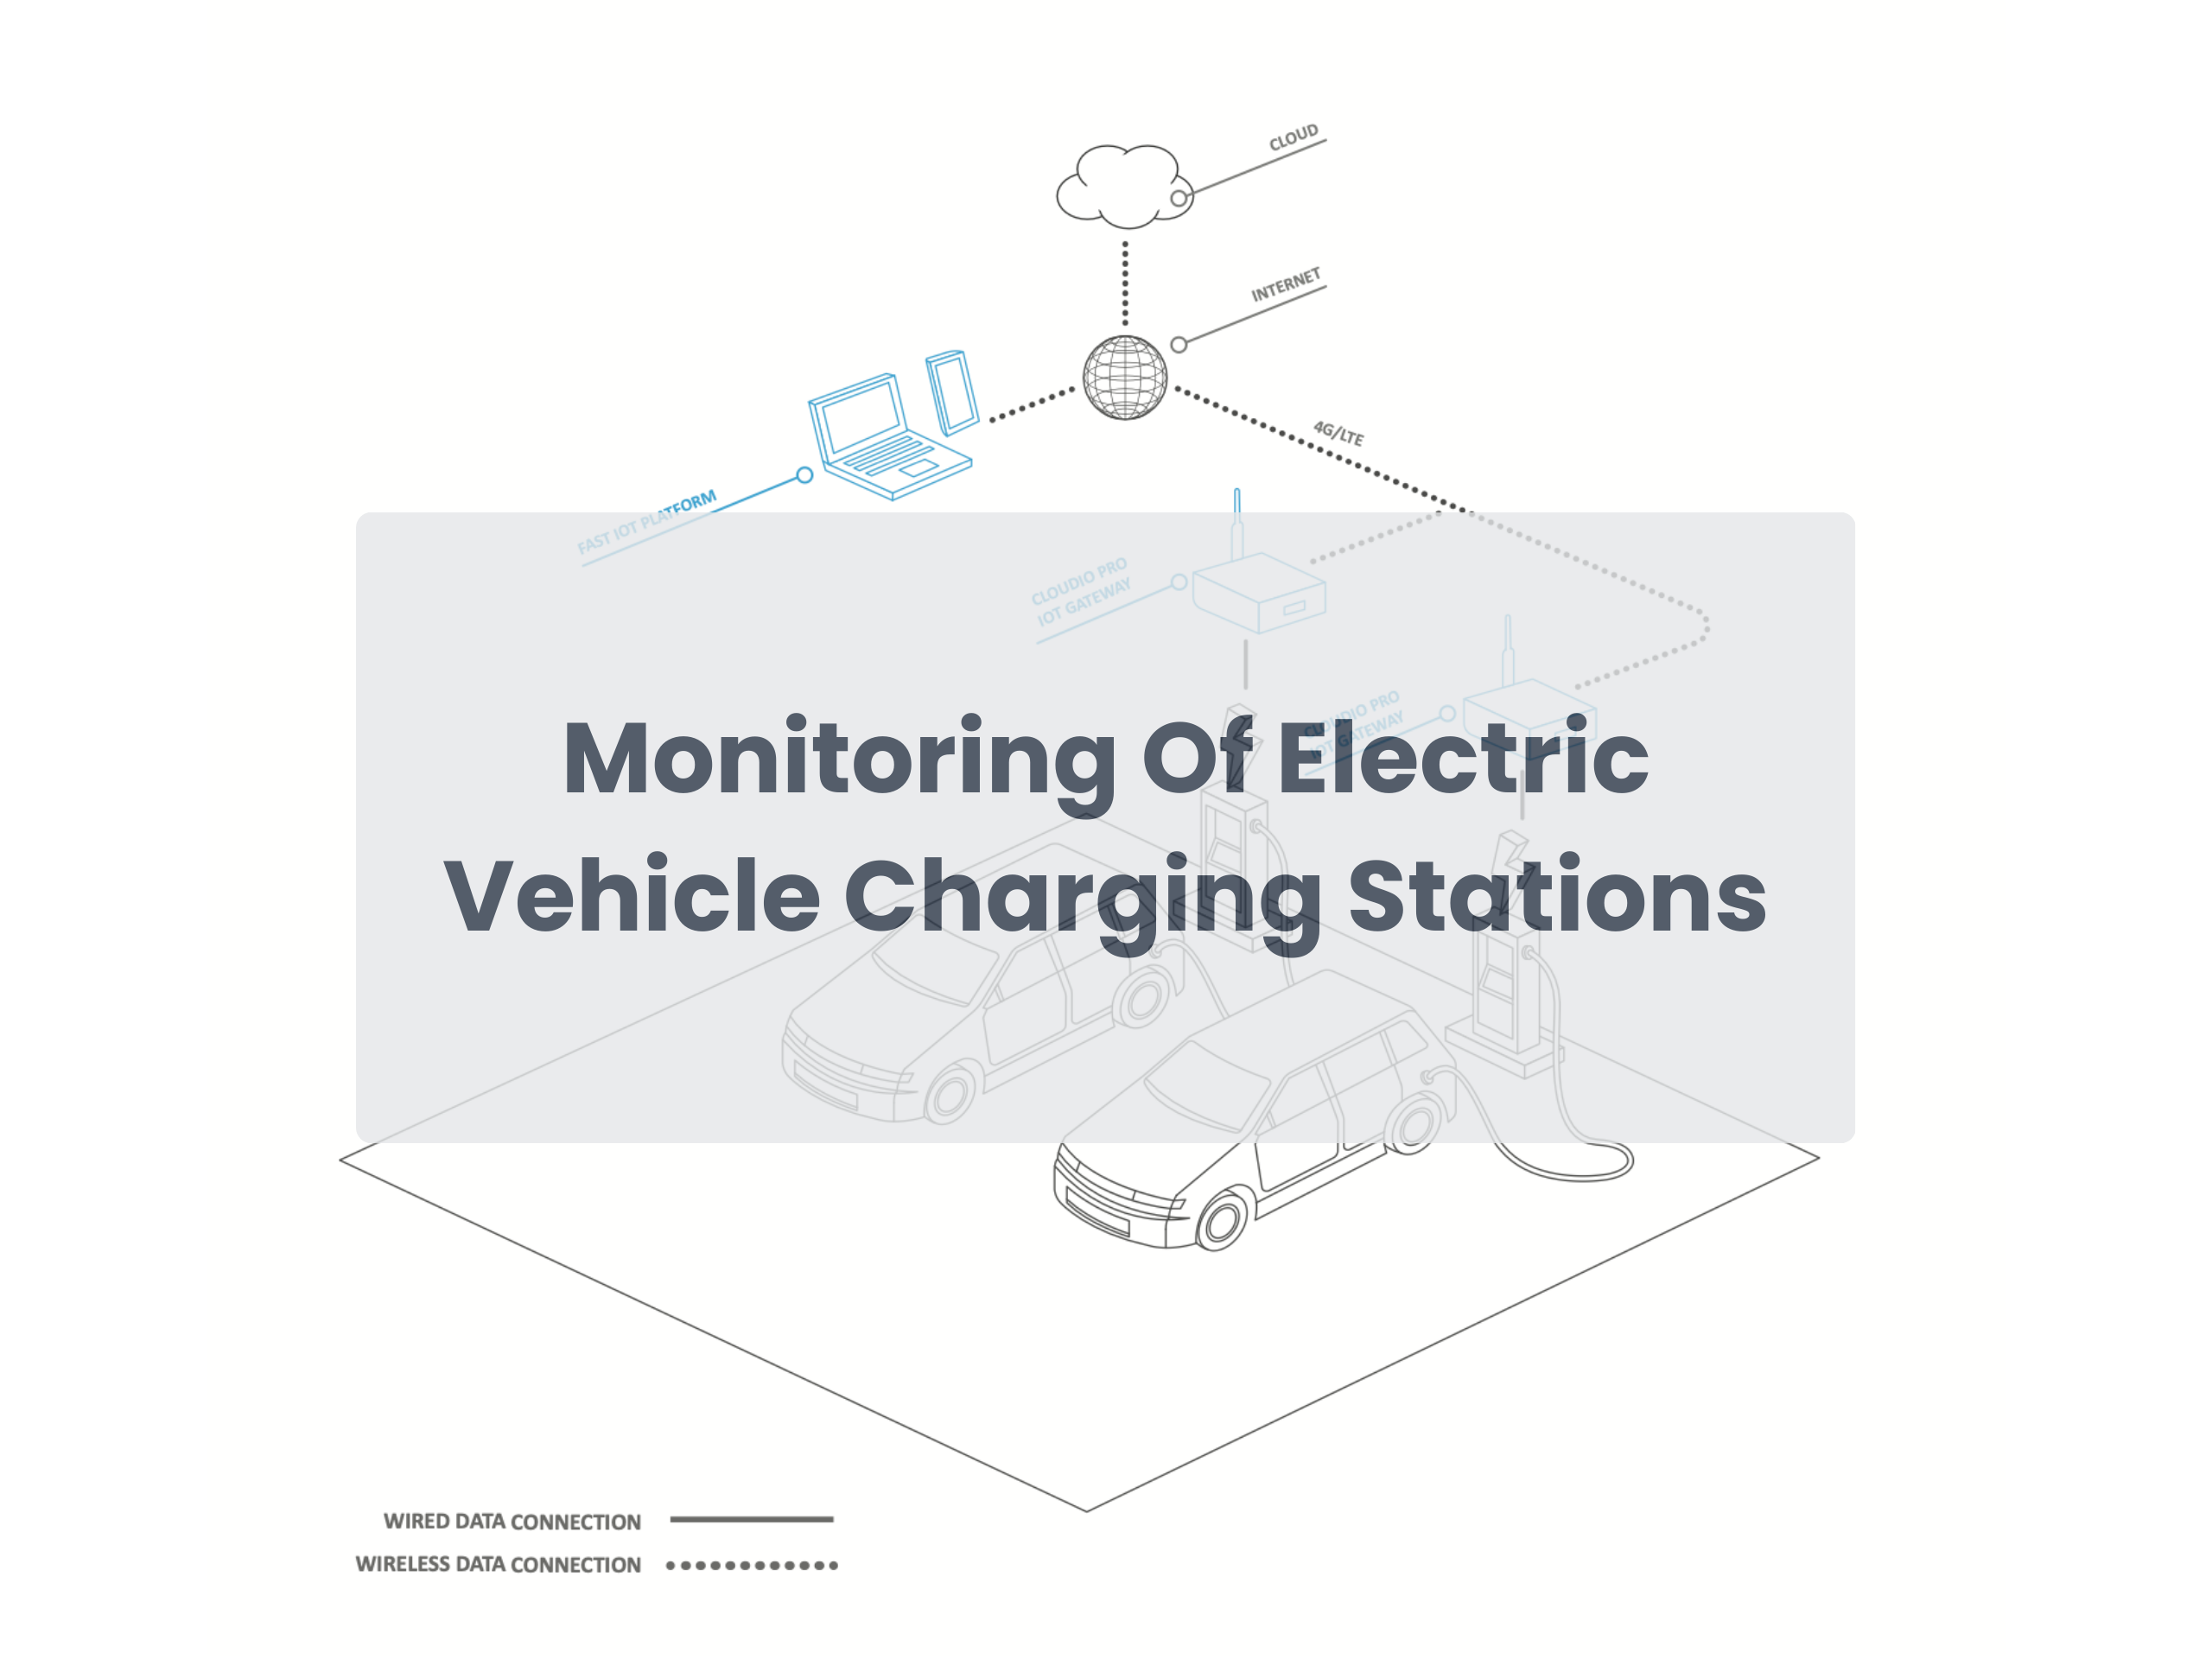 Monitoring Of Electric Vehicle Charging Stations